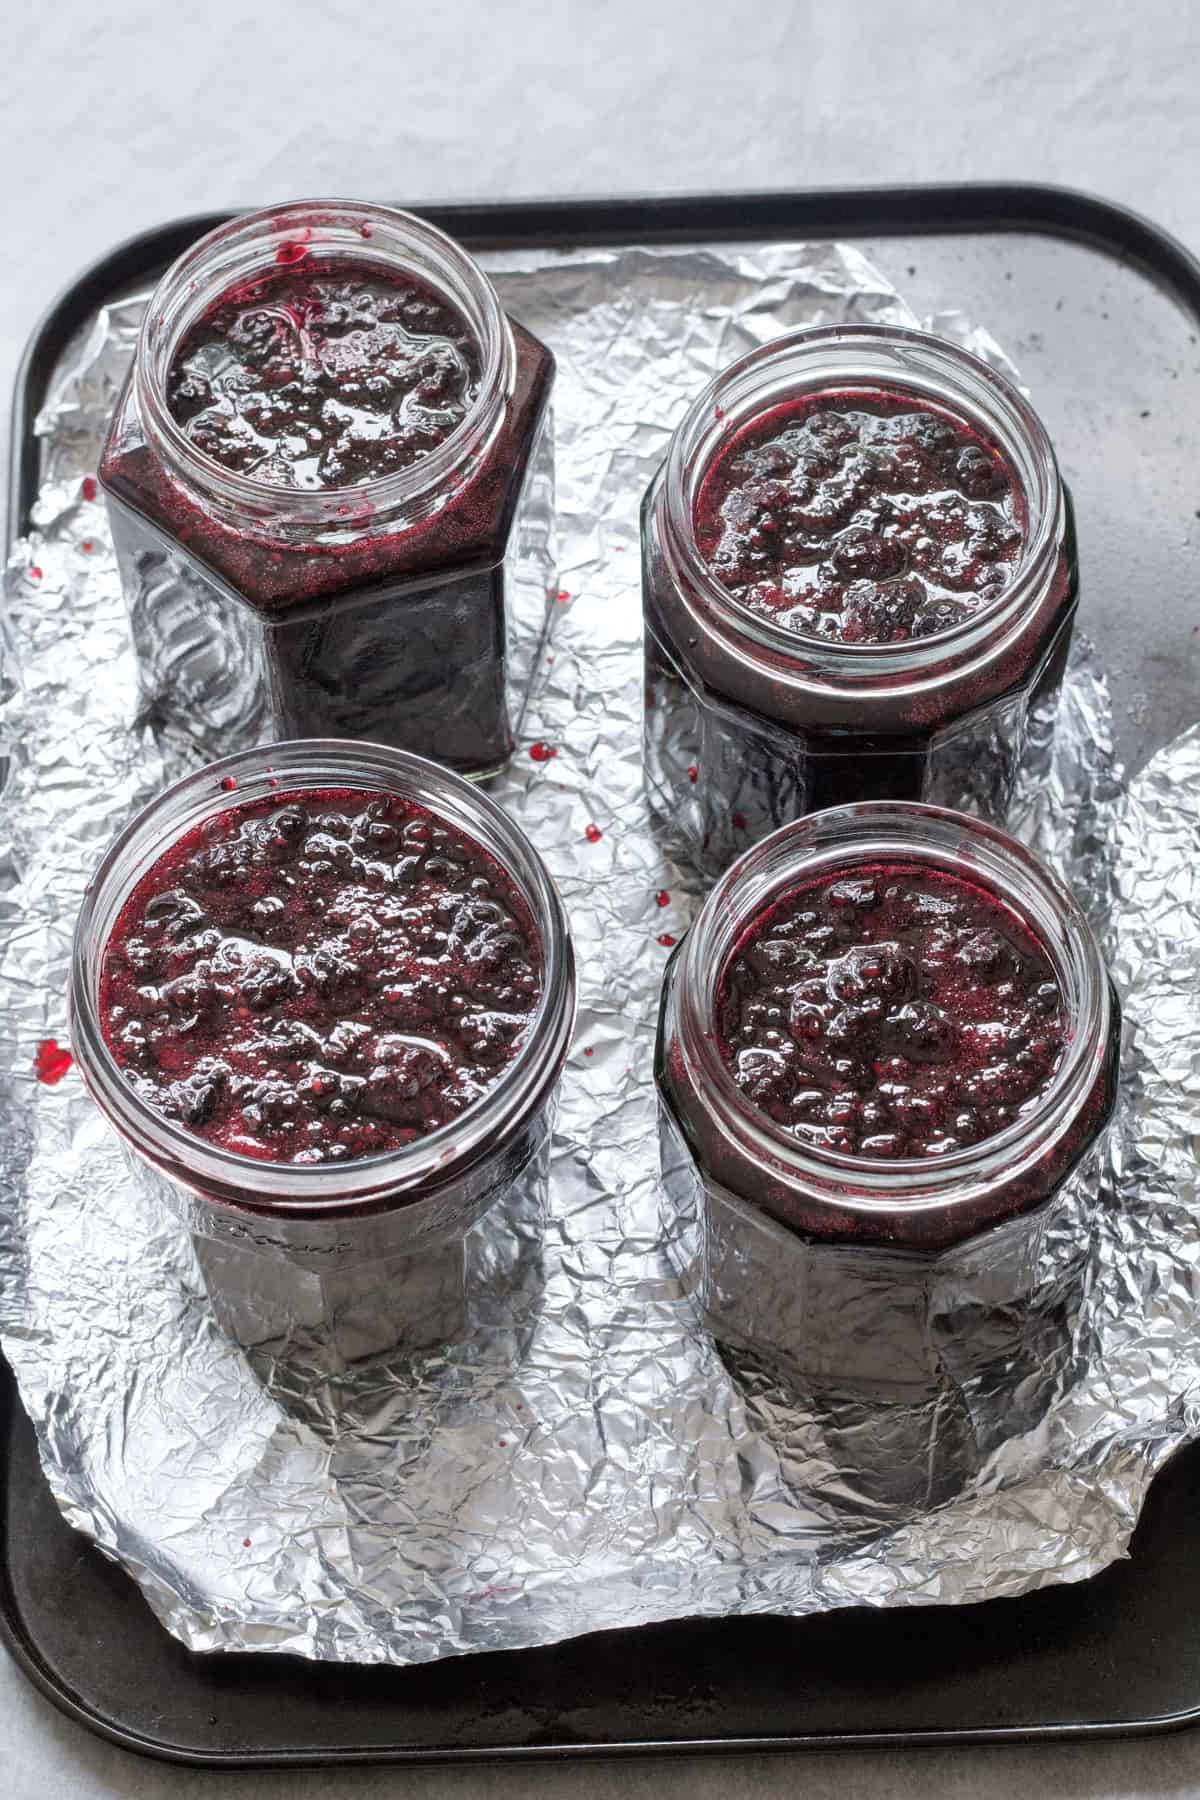 Four jars filled with blackberry jam on a tray.